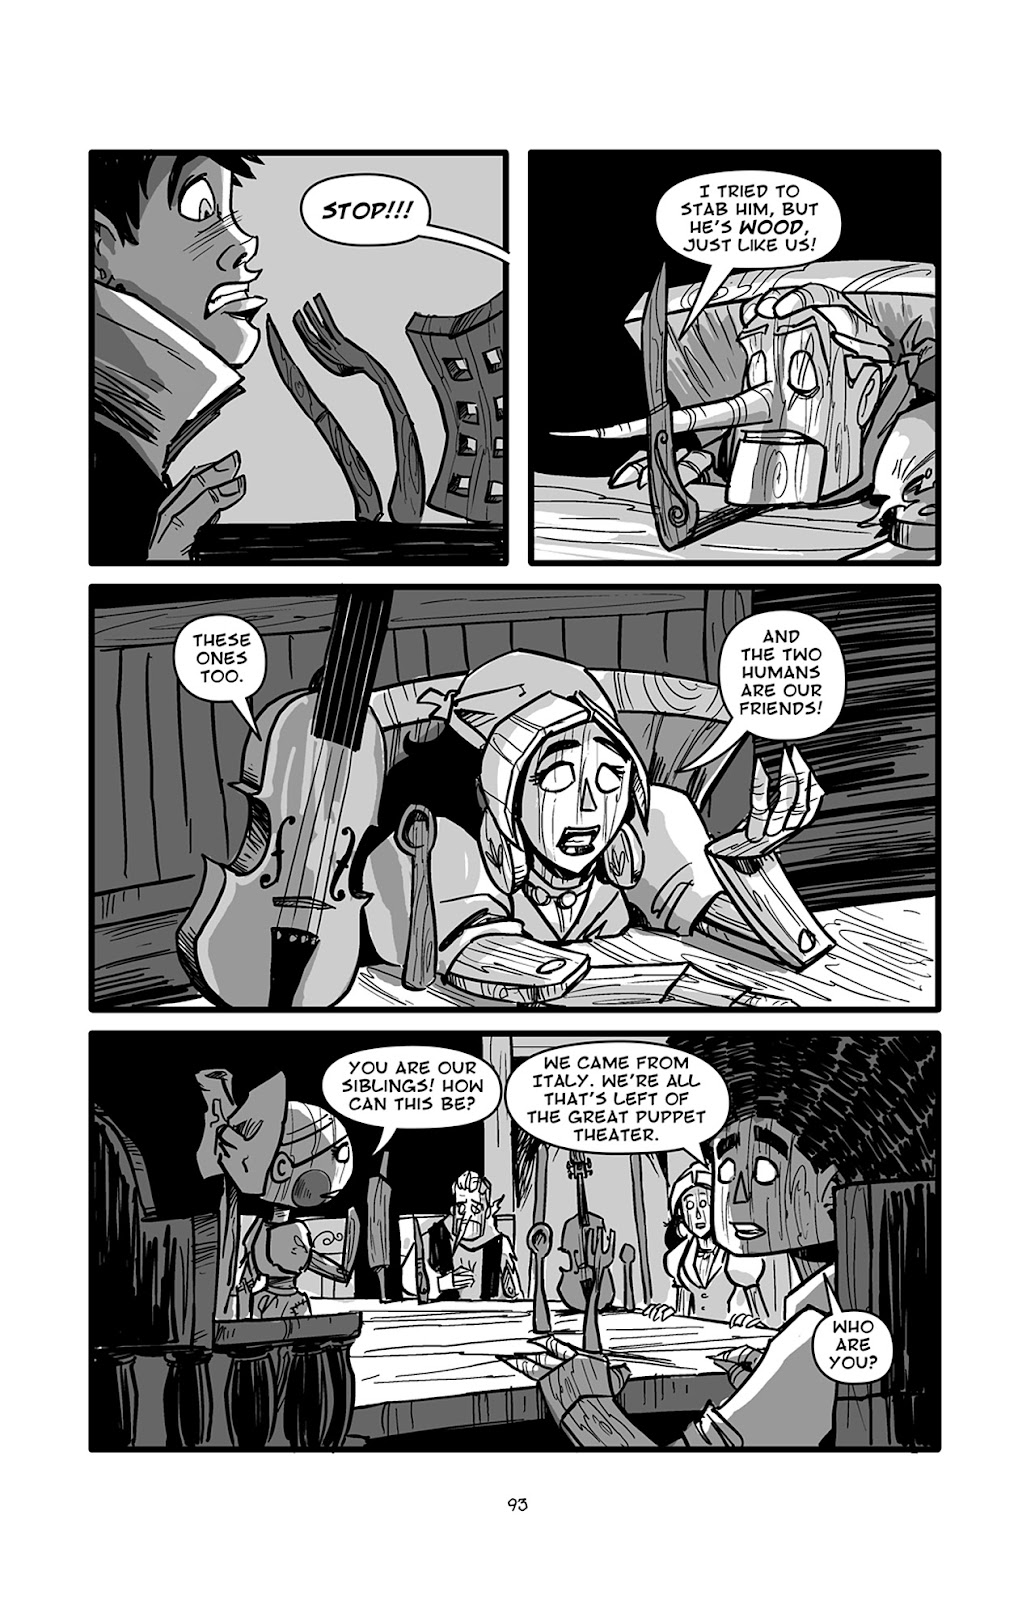 Pinocchio: Vampire Slayer - Of Wood and Blood issue 4 - Page 20